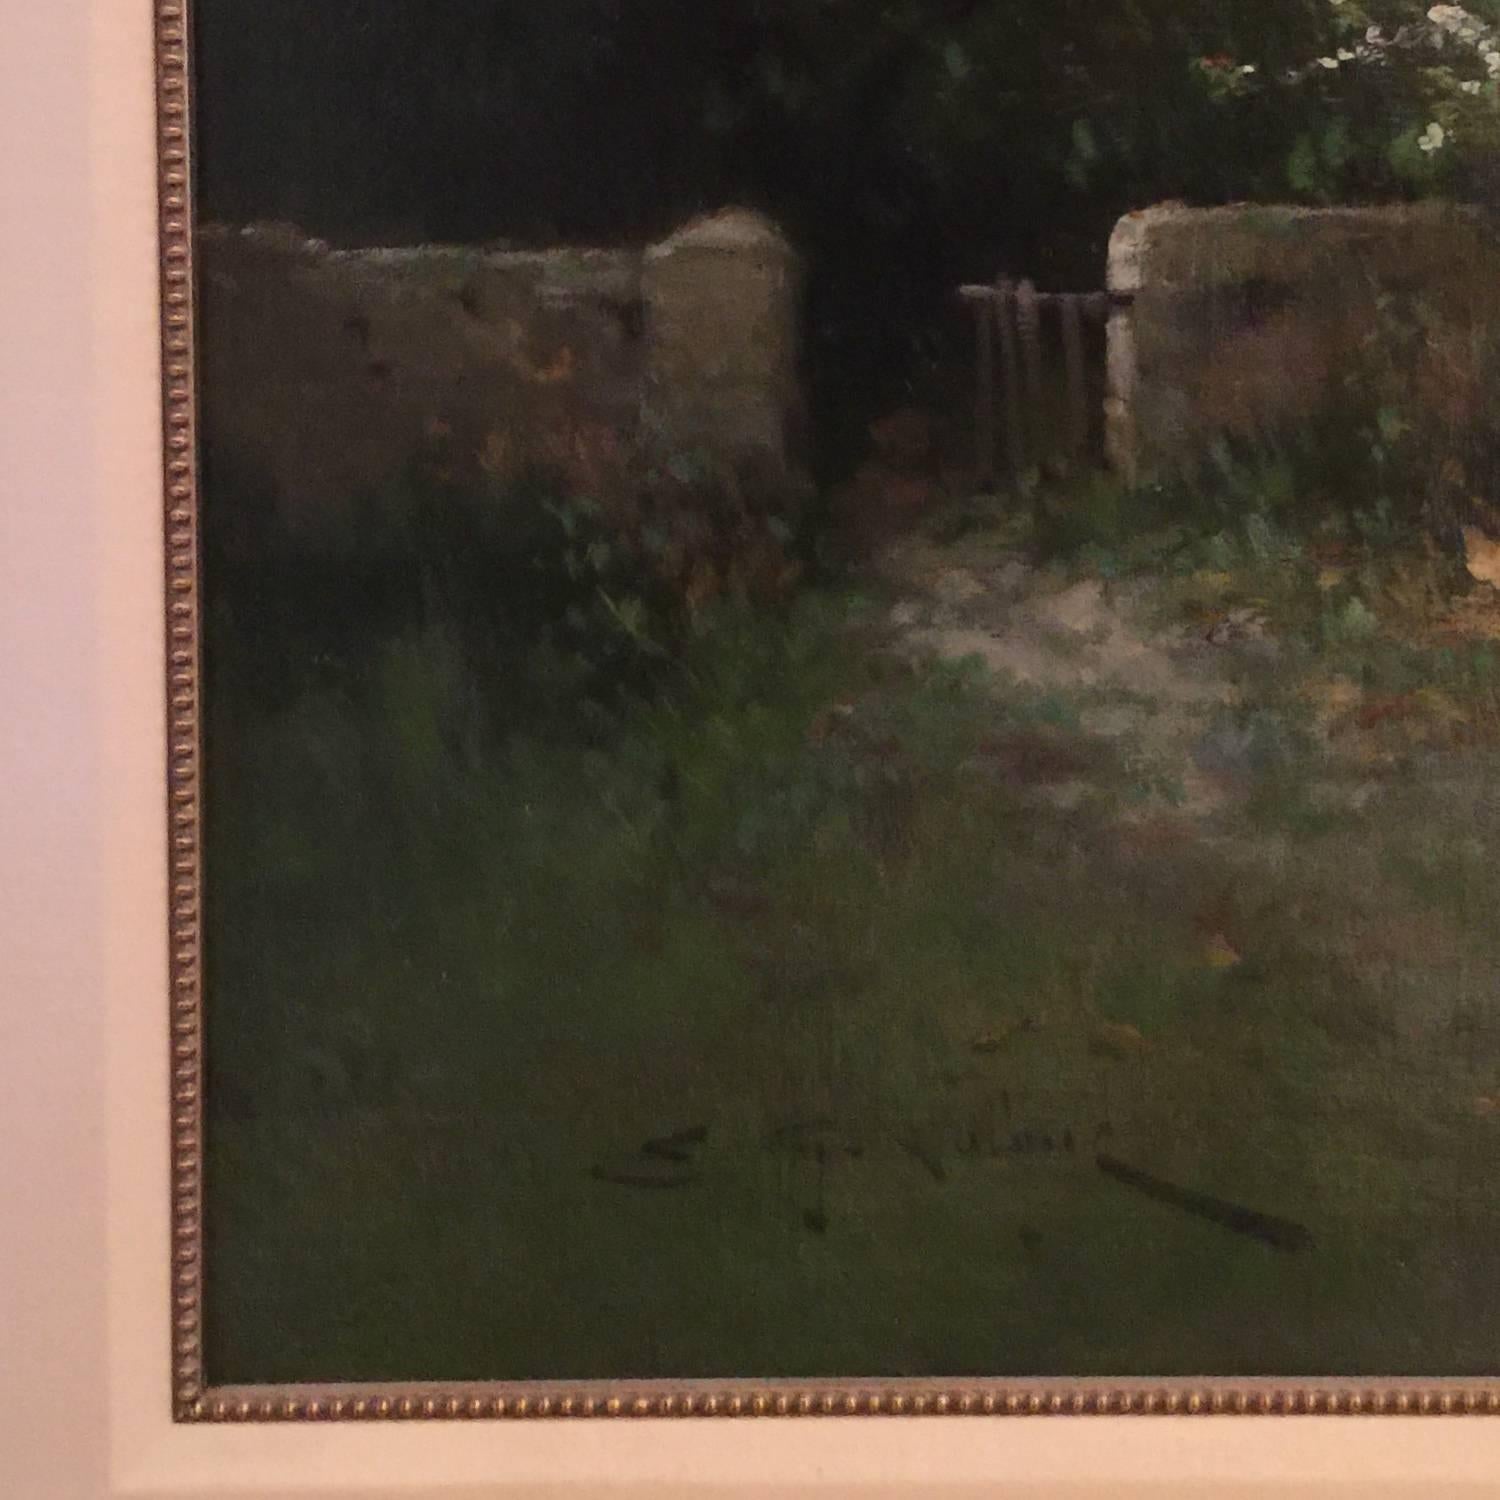 Original Galien-Laloue's oil on canvas. In his landscape works he was more attuned to the tradition of the Barbizon School and the Impressionists, recording life in the rural French countryside. This painting is one of his rural landscape works